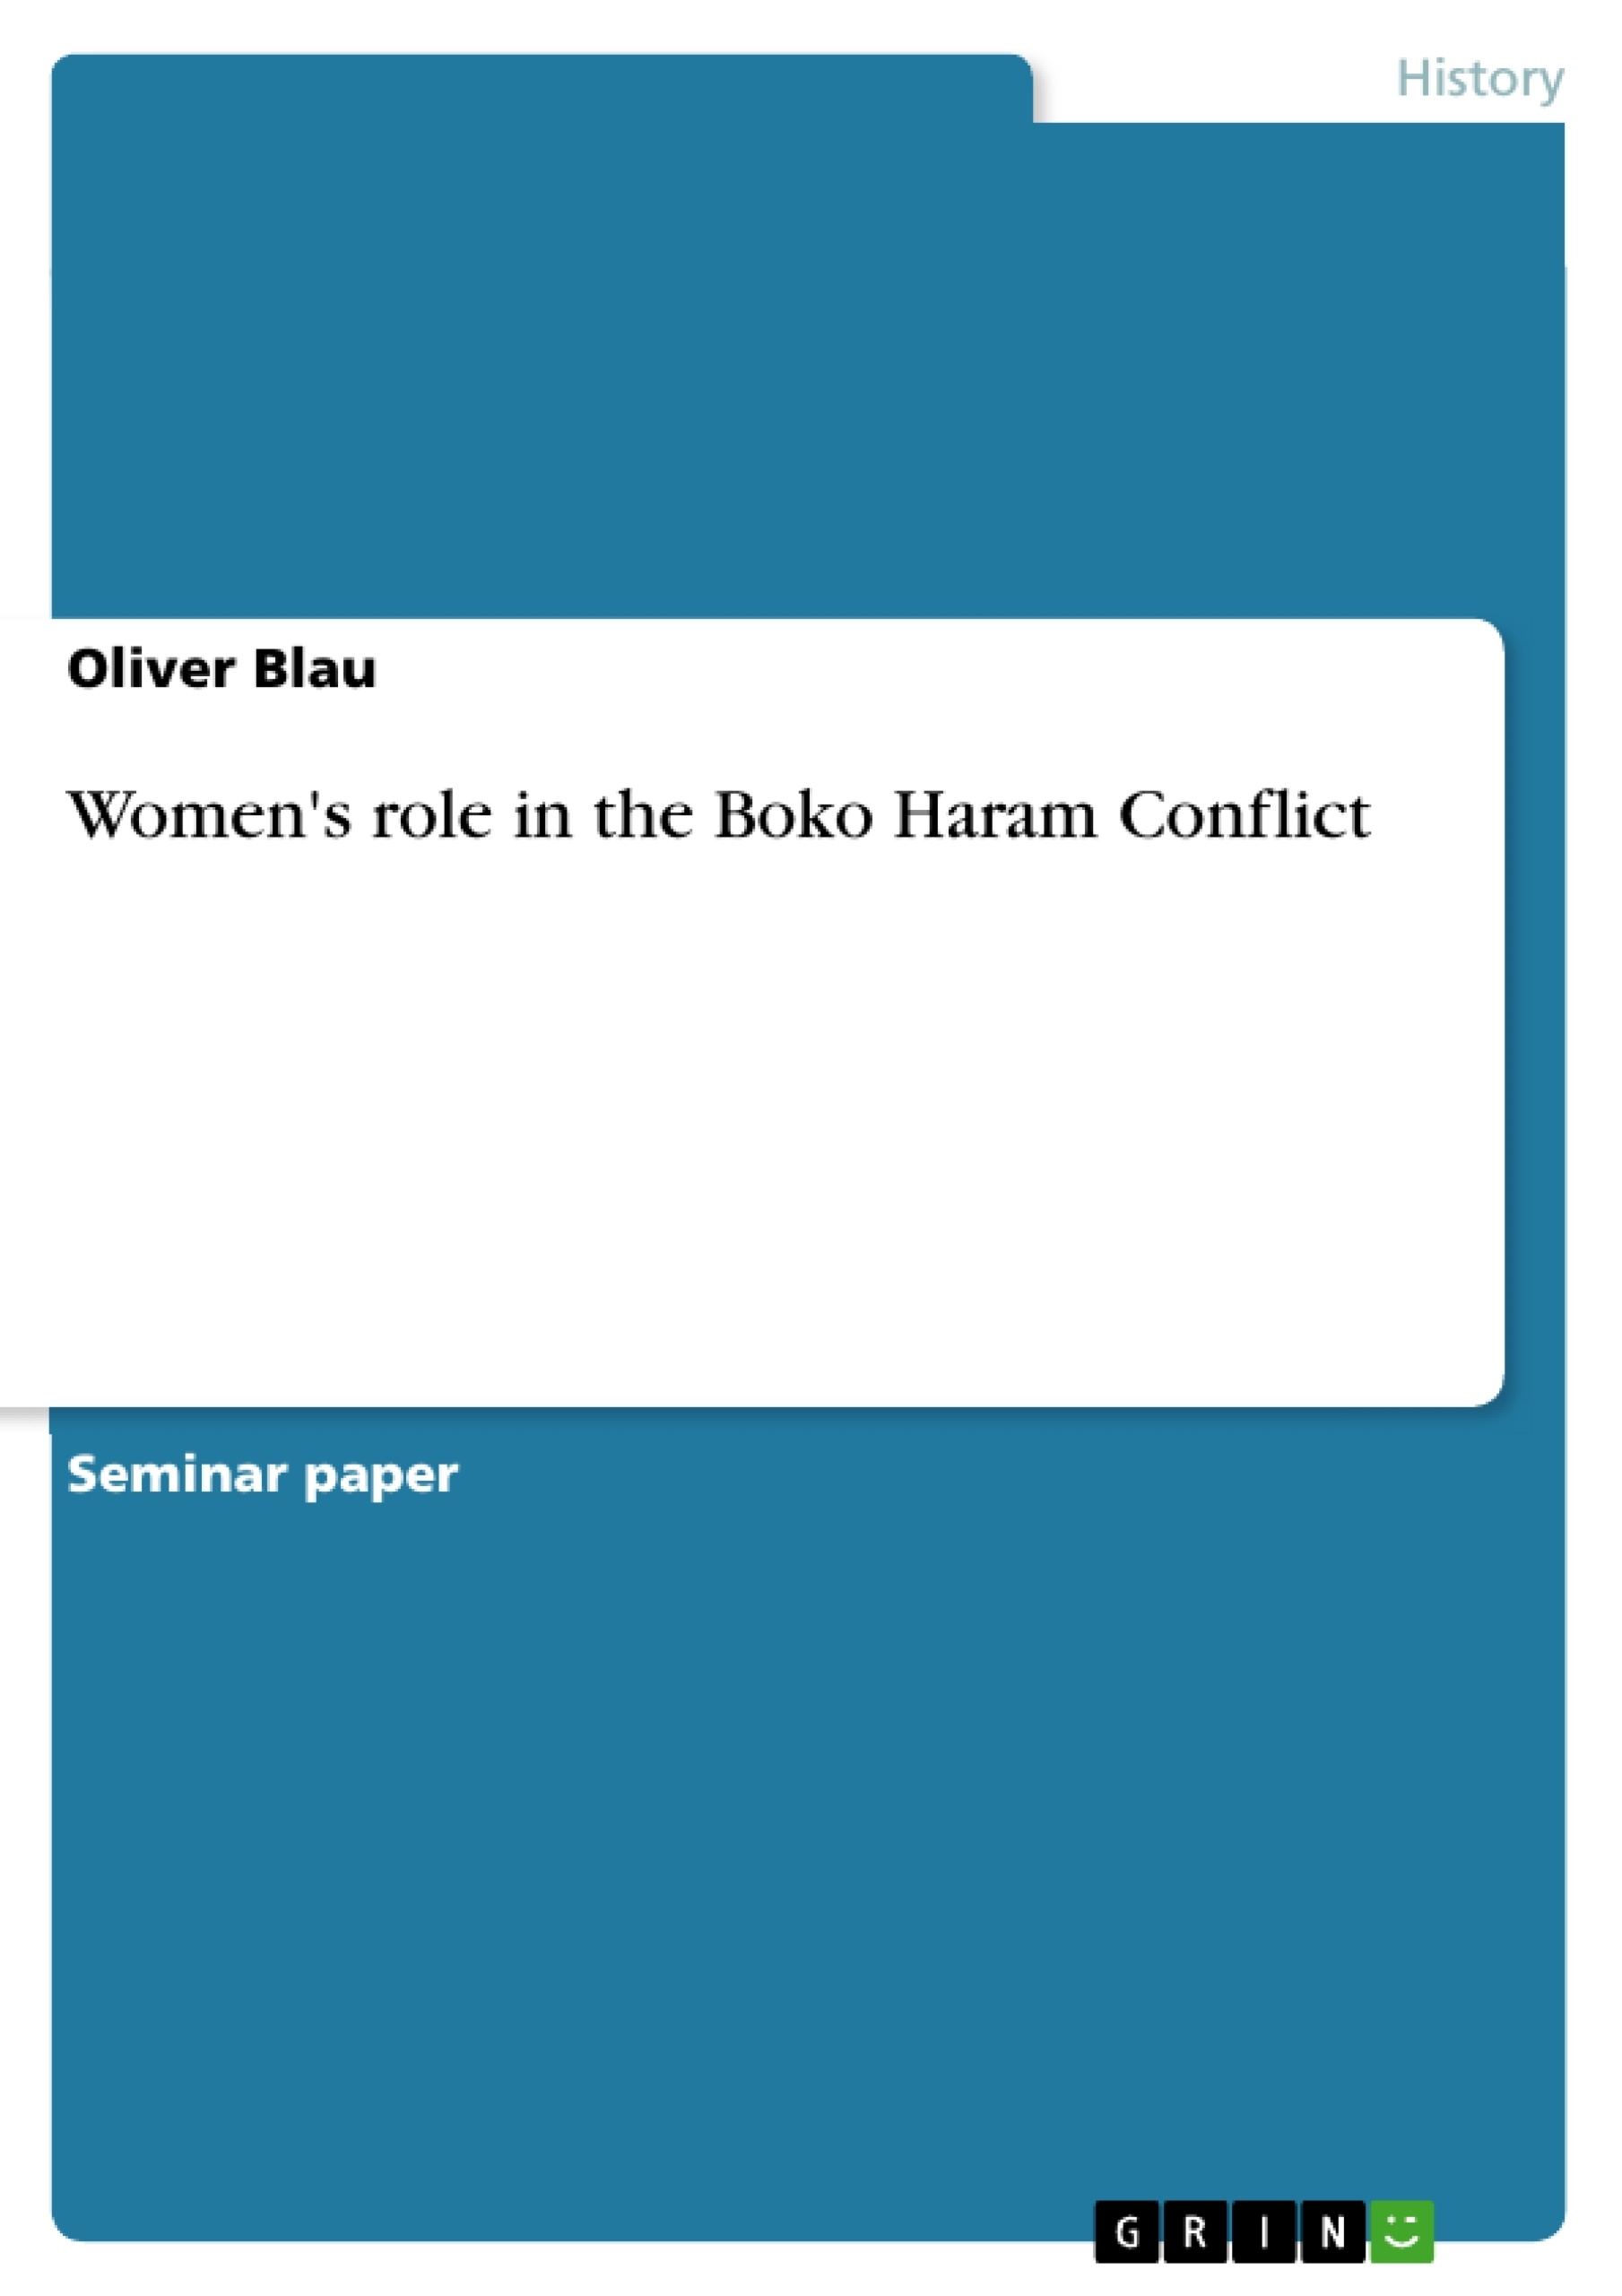 Title: Women's role in the Boko Haram Conflict